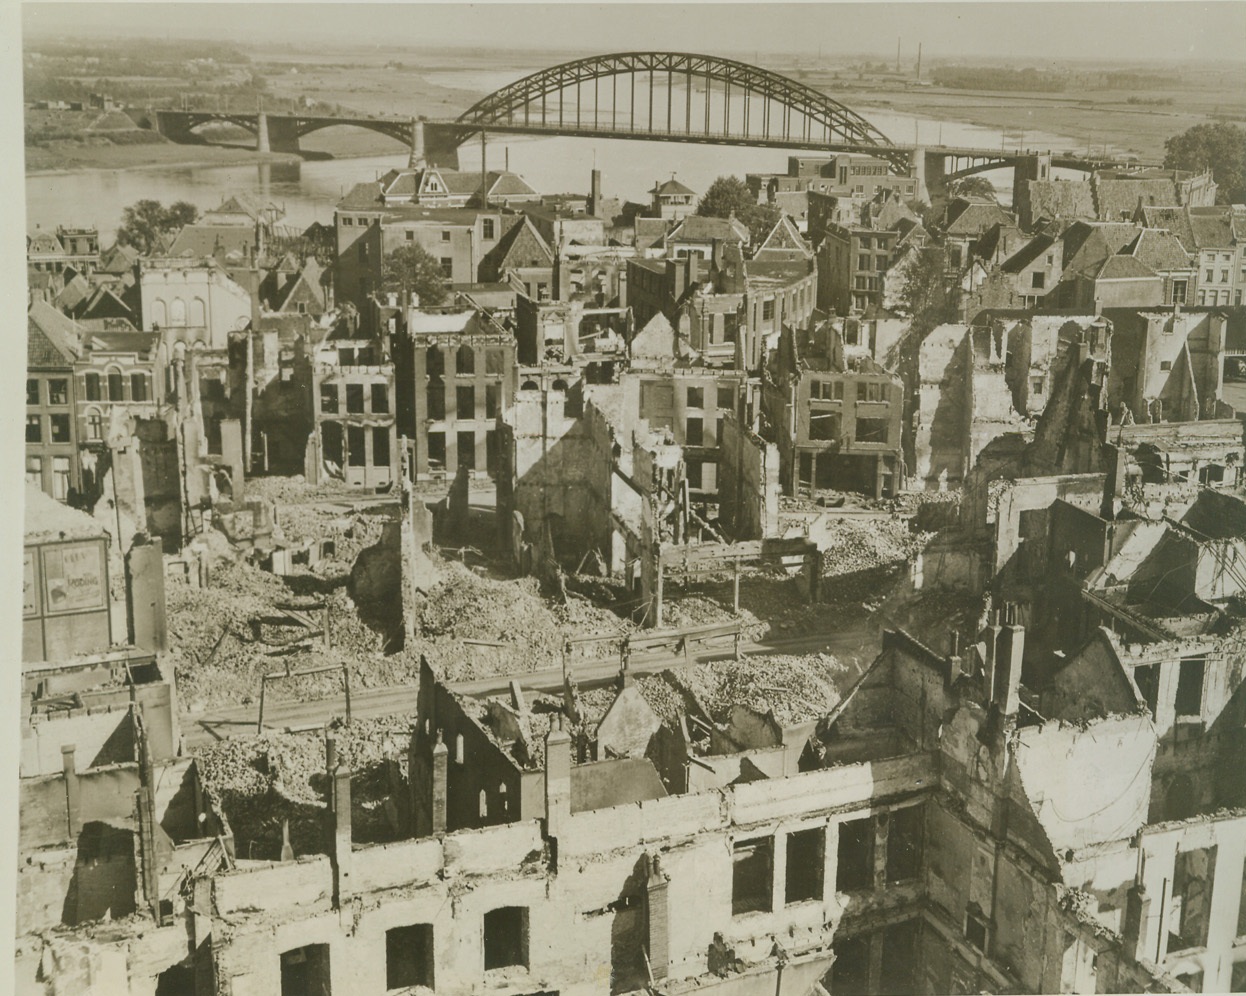 Devastated NiJMegen, 10/5/1944. Holland – Burned out shells of buildings and piles of rubble mark this view of the war-blasted town of NiJMegen after its capture by the Allies. In the distance, is the key bridge over the Waal (River) captured intact in the rapid advance. Credit: (Army Official Photo from ACME);